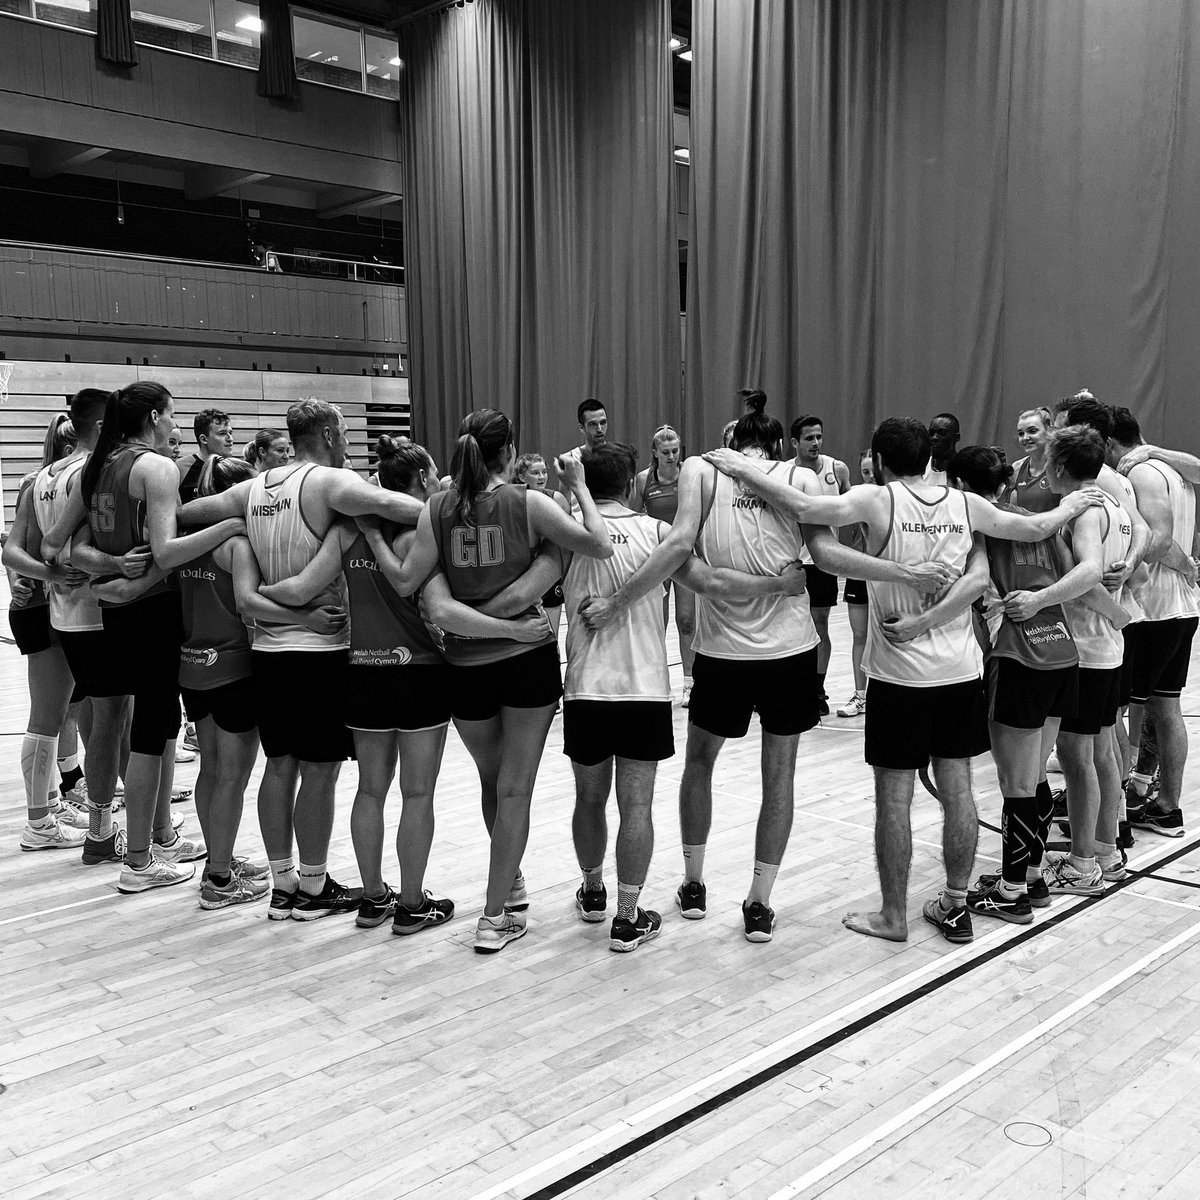 #fridayfeels 

Another historic moment for @EnglandMMNA and the Thorns! 

#dopepic #EMMNA #thorns #momentslikethese #mensnetball